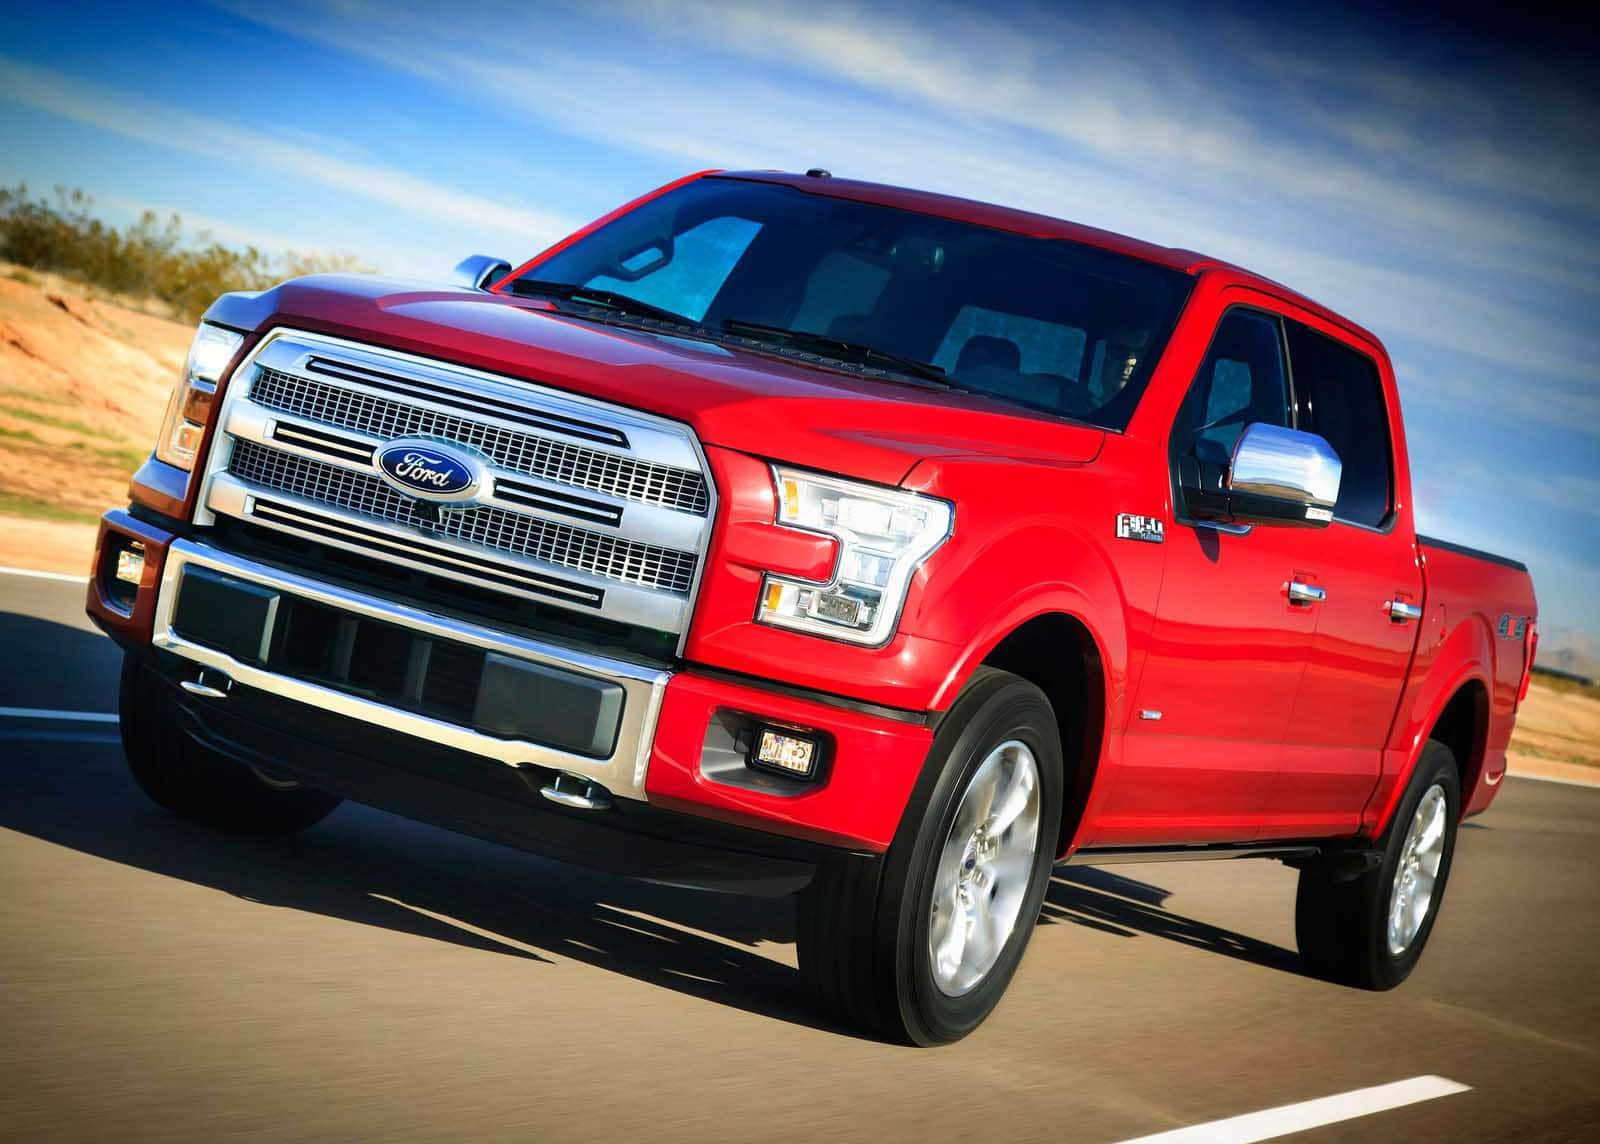 Ford Truck: Ready To Take On Any Terrain Background